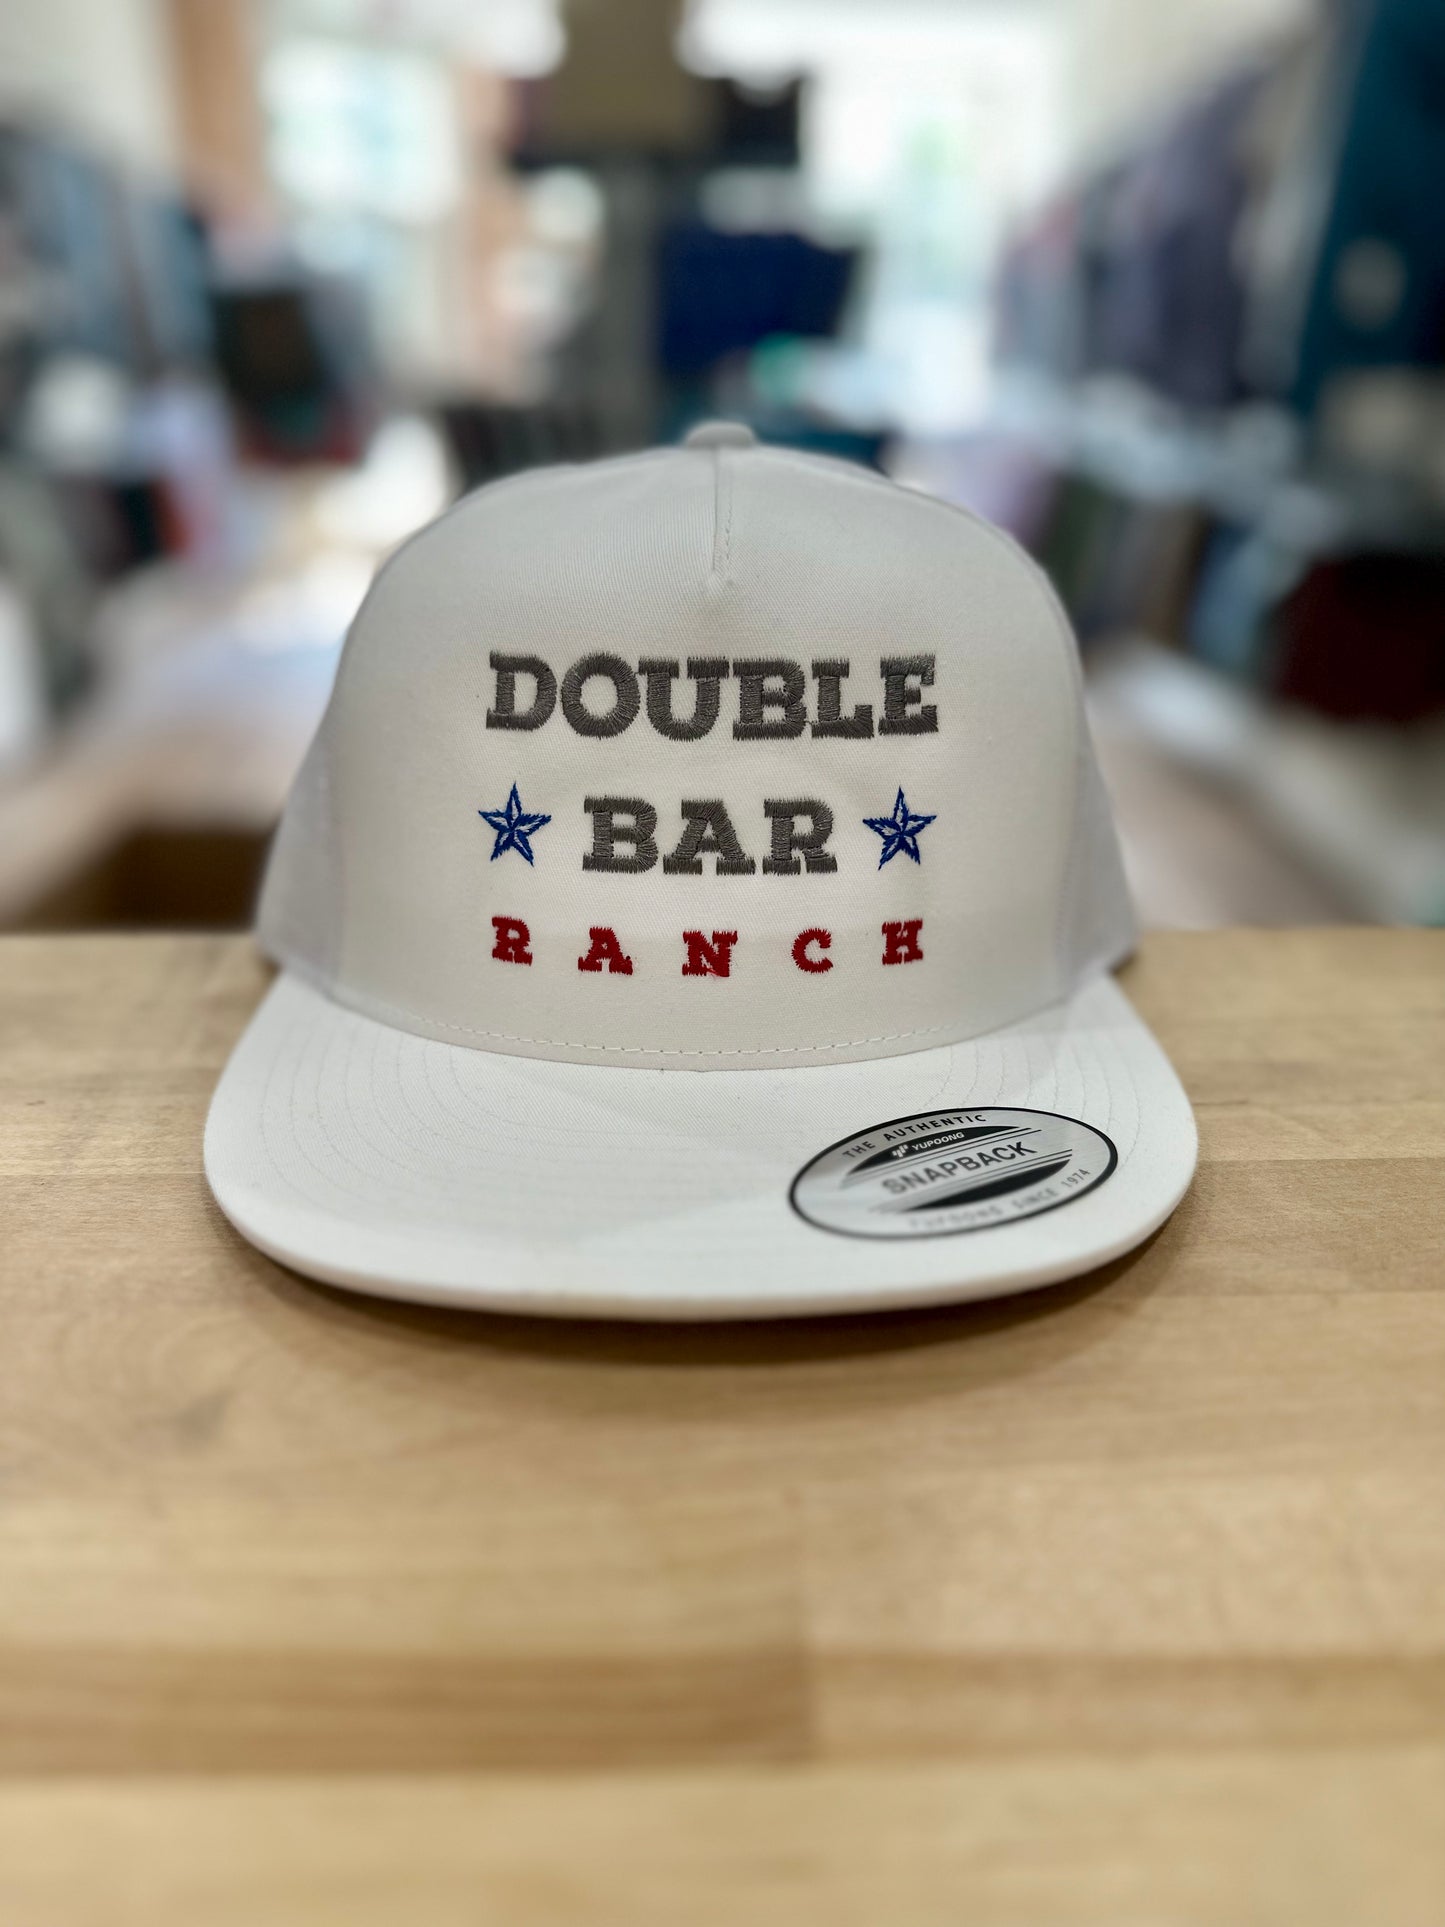 Double Bar Hat Co.-Icey White Patriotic